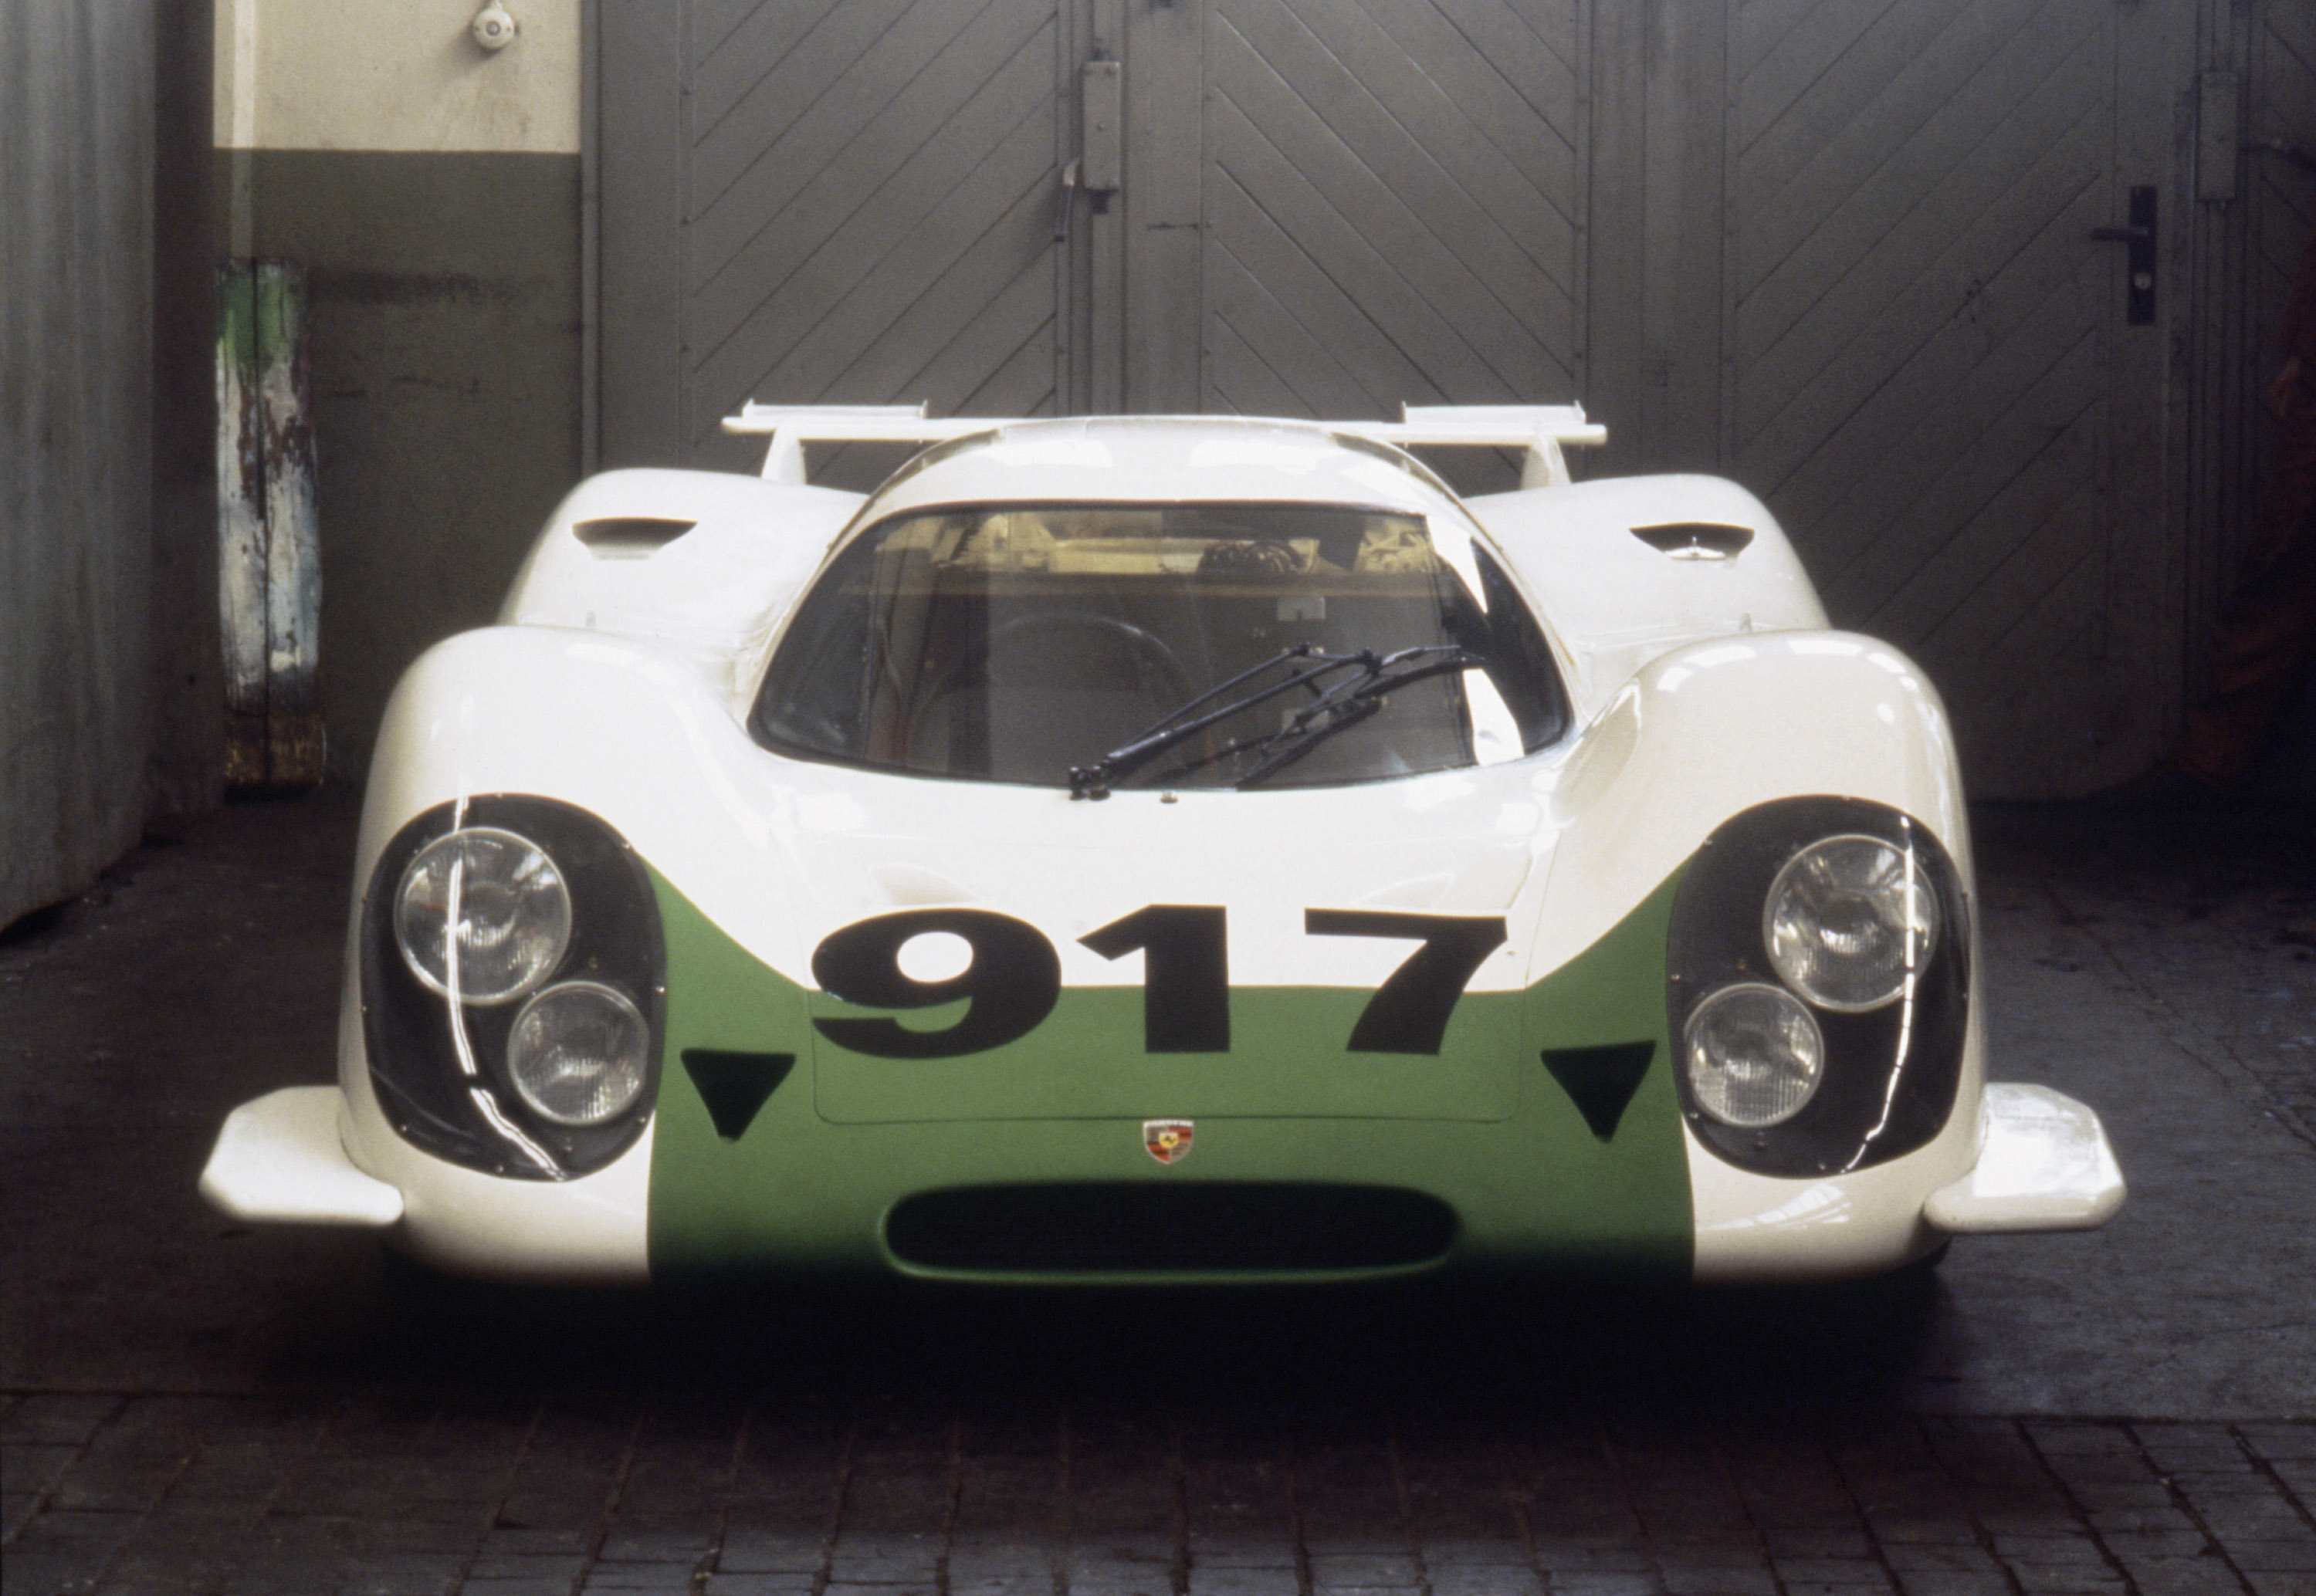 40 Years Anniversary of the Porsche 917 - Greatest racing car in history